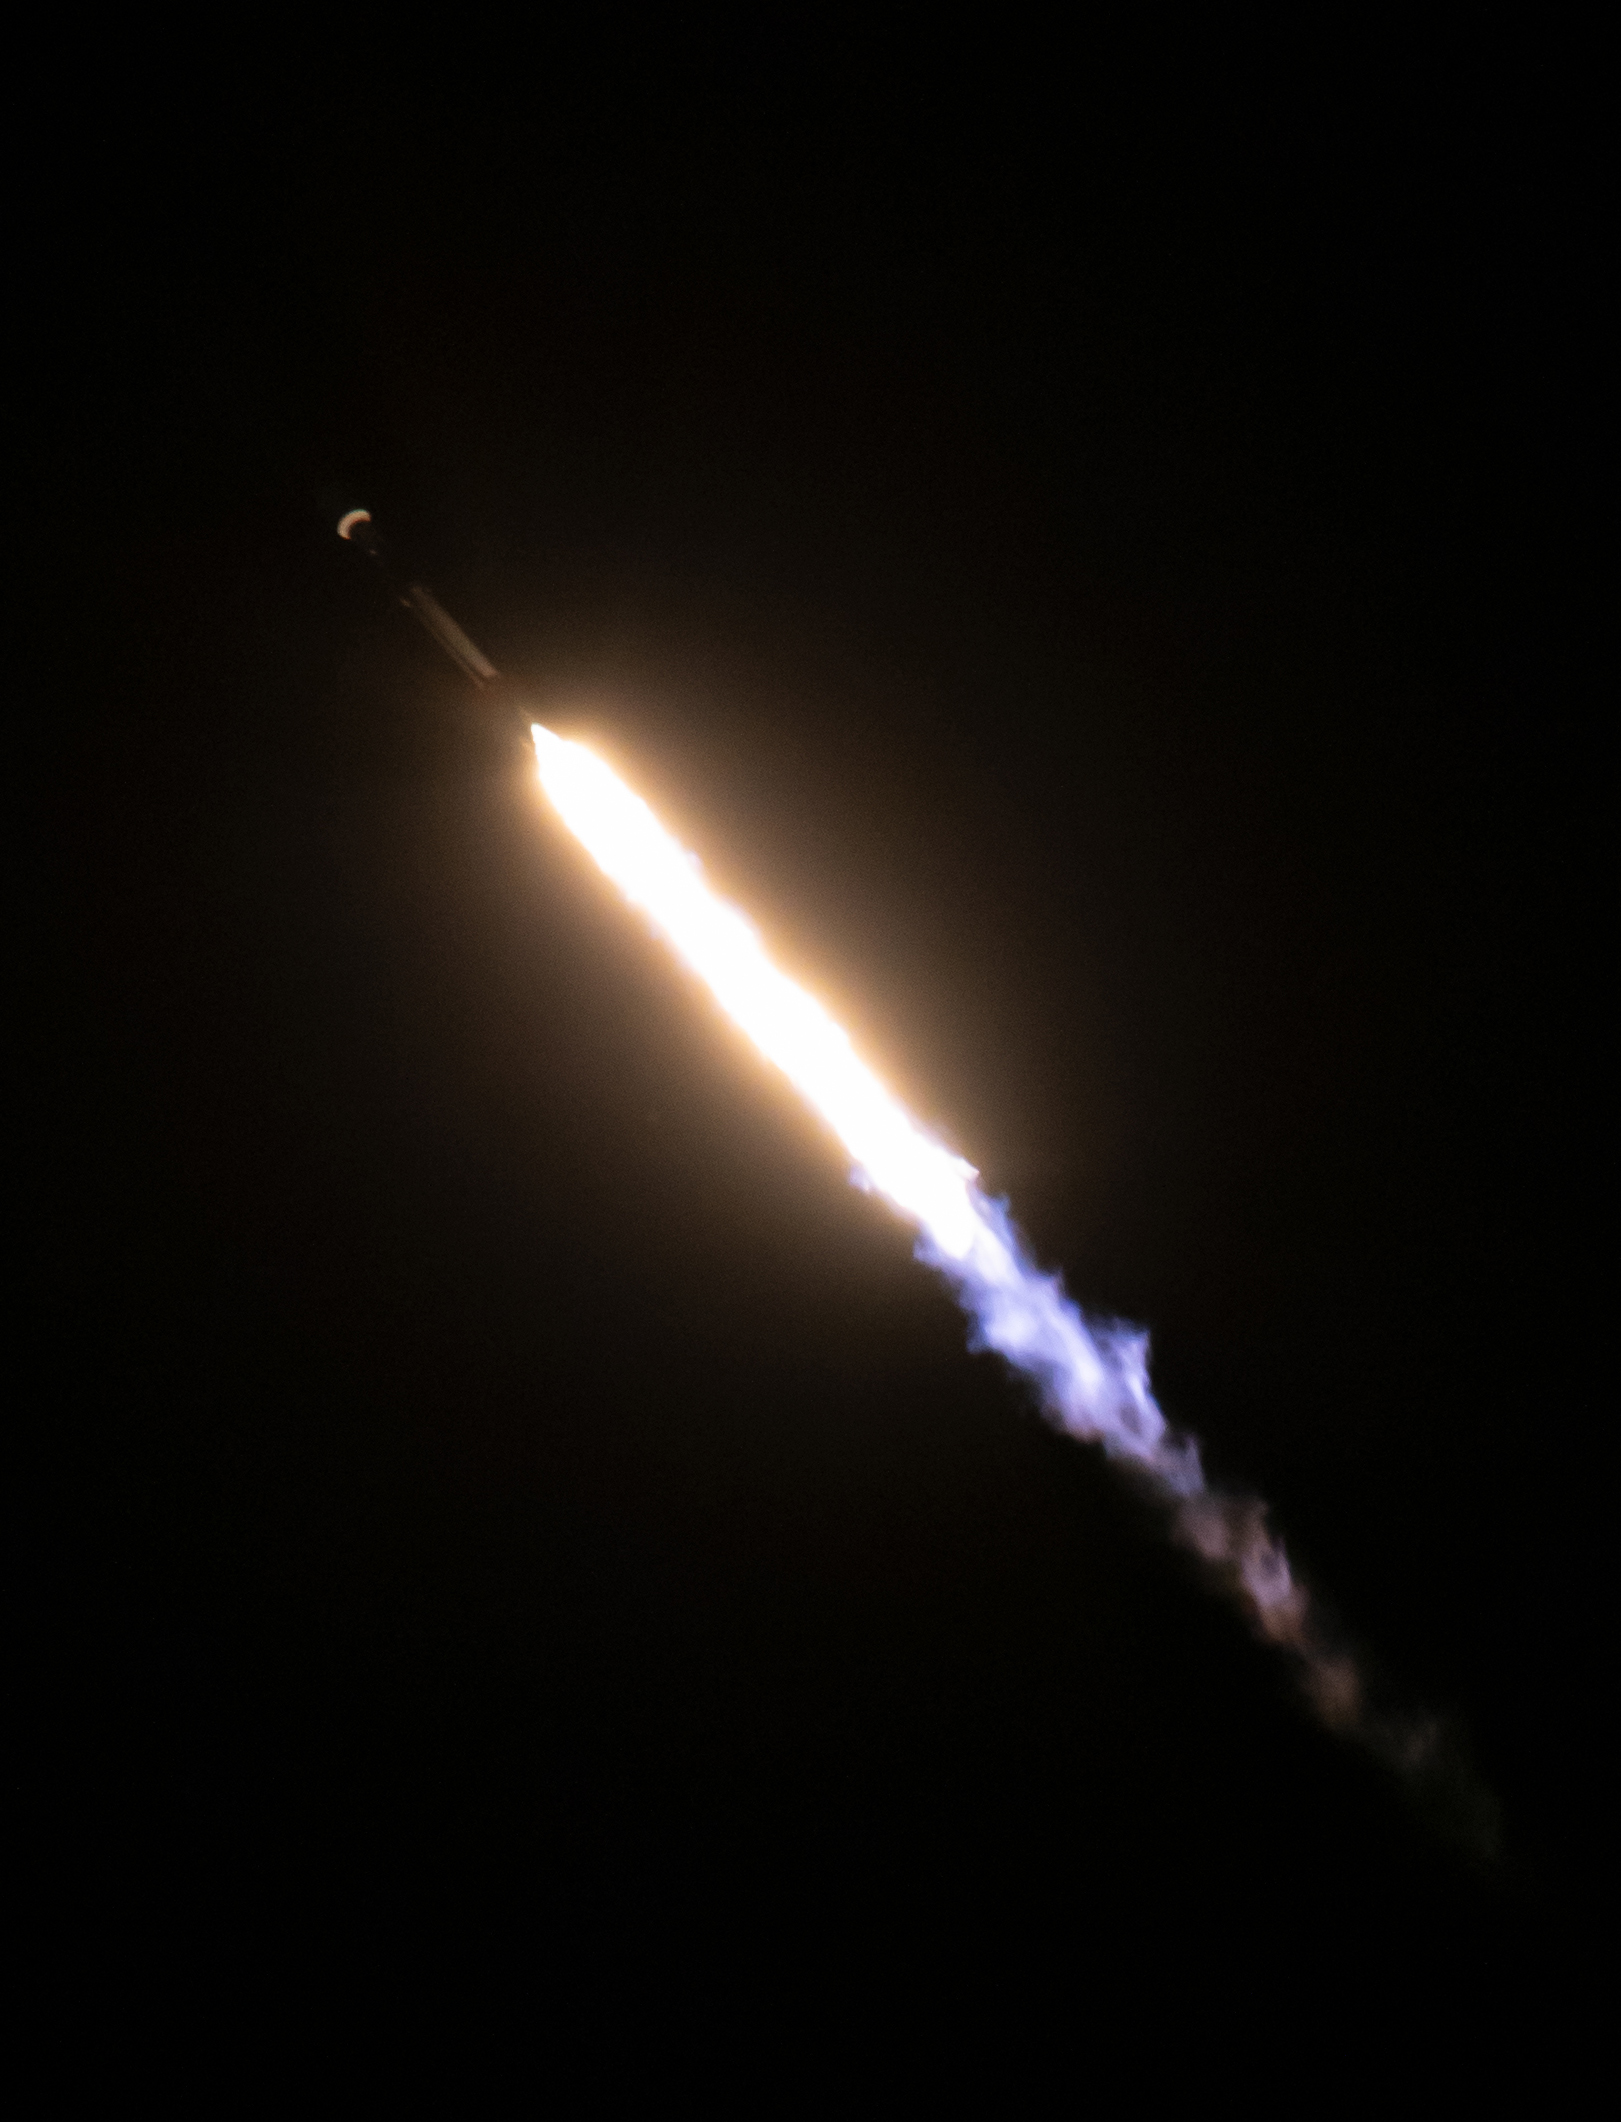 The faint image of a rocket is seen in the shadows of the black night sky as a yellow-white fire bursts from its end, fading to shades of blue and purple as the rocket ascends.